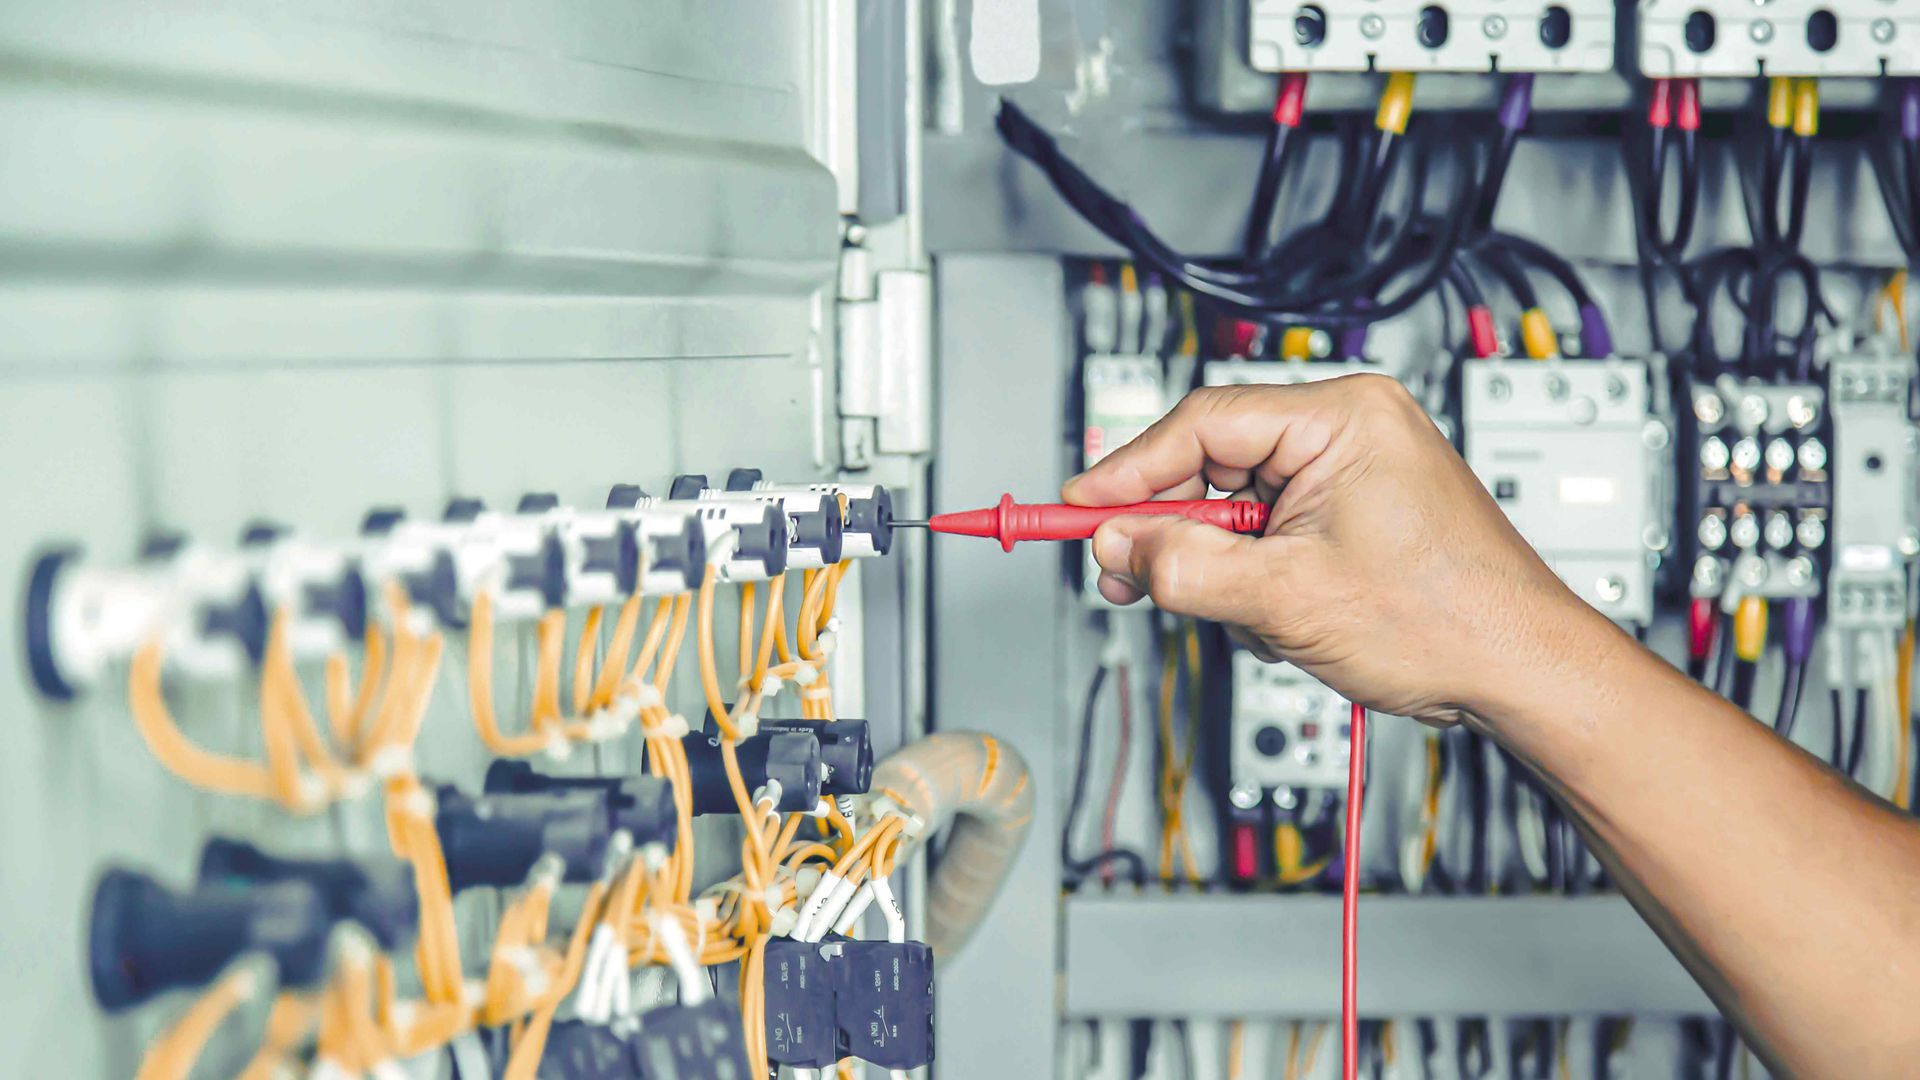 Zoom in on a hand using a tool  to repair a circuit breaker